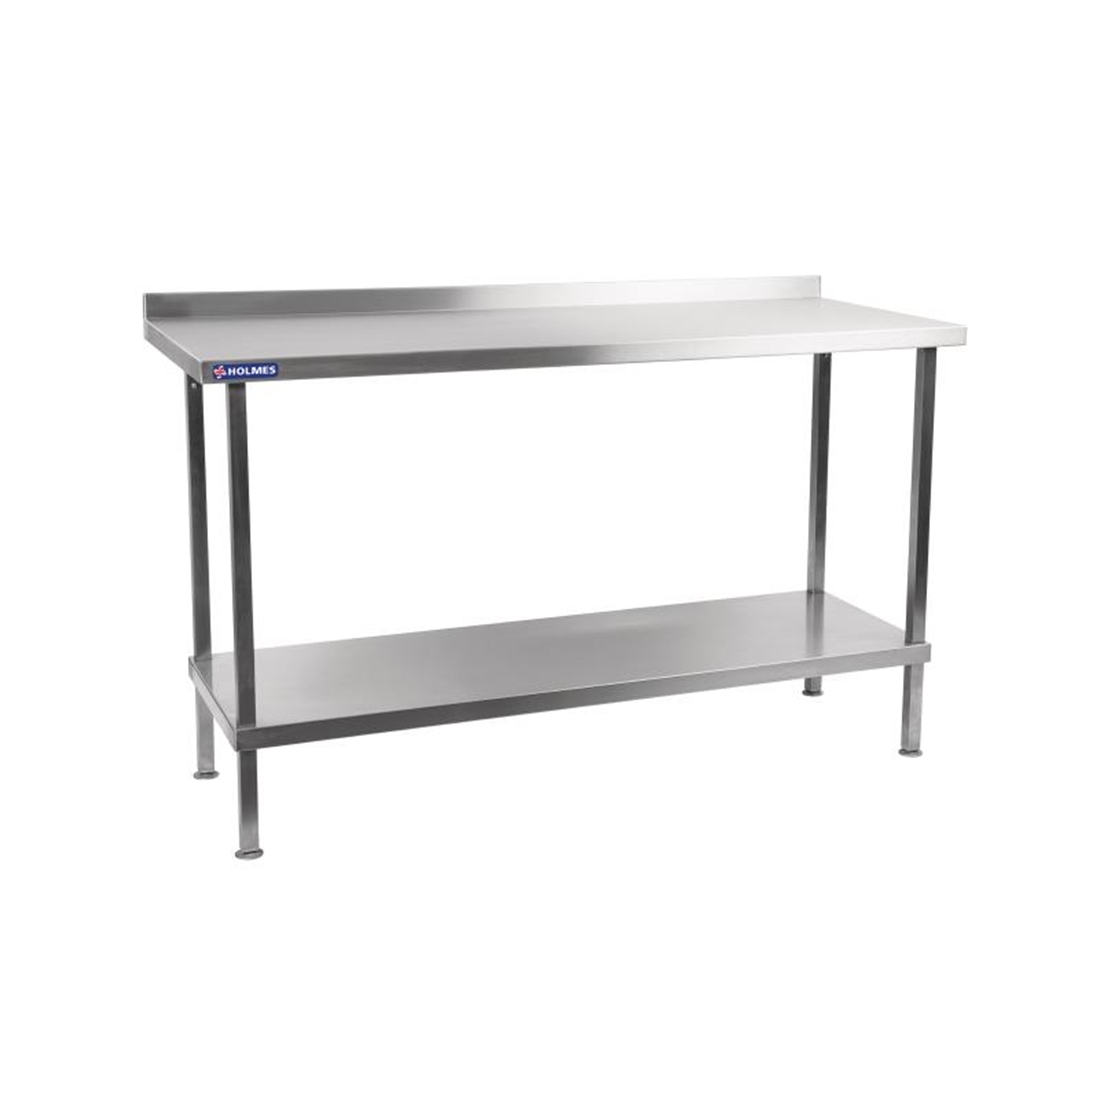 Holmes Self Assembly Stainless Steel Wall Table 1200mm